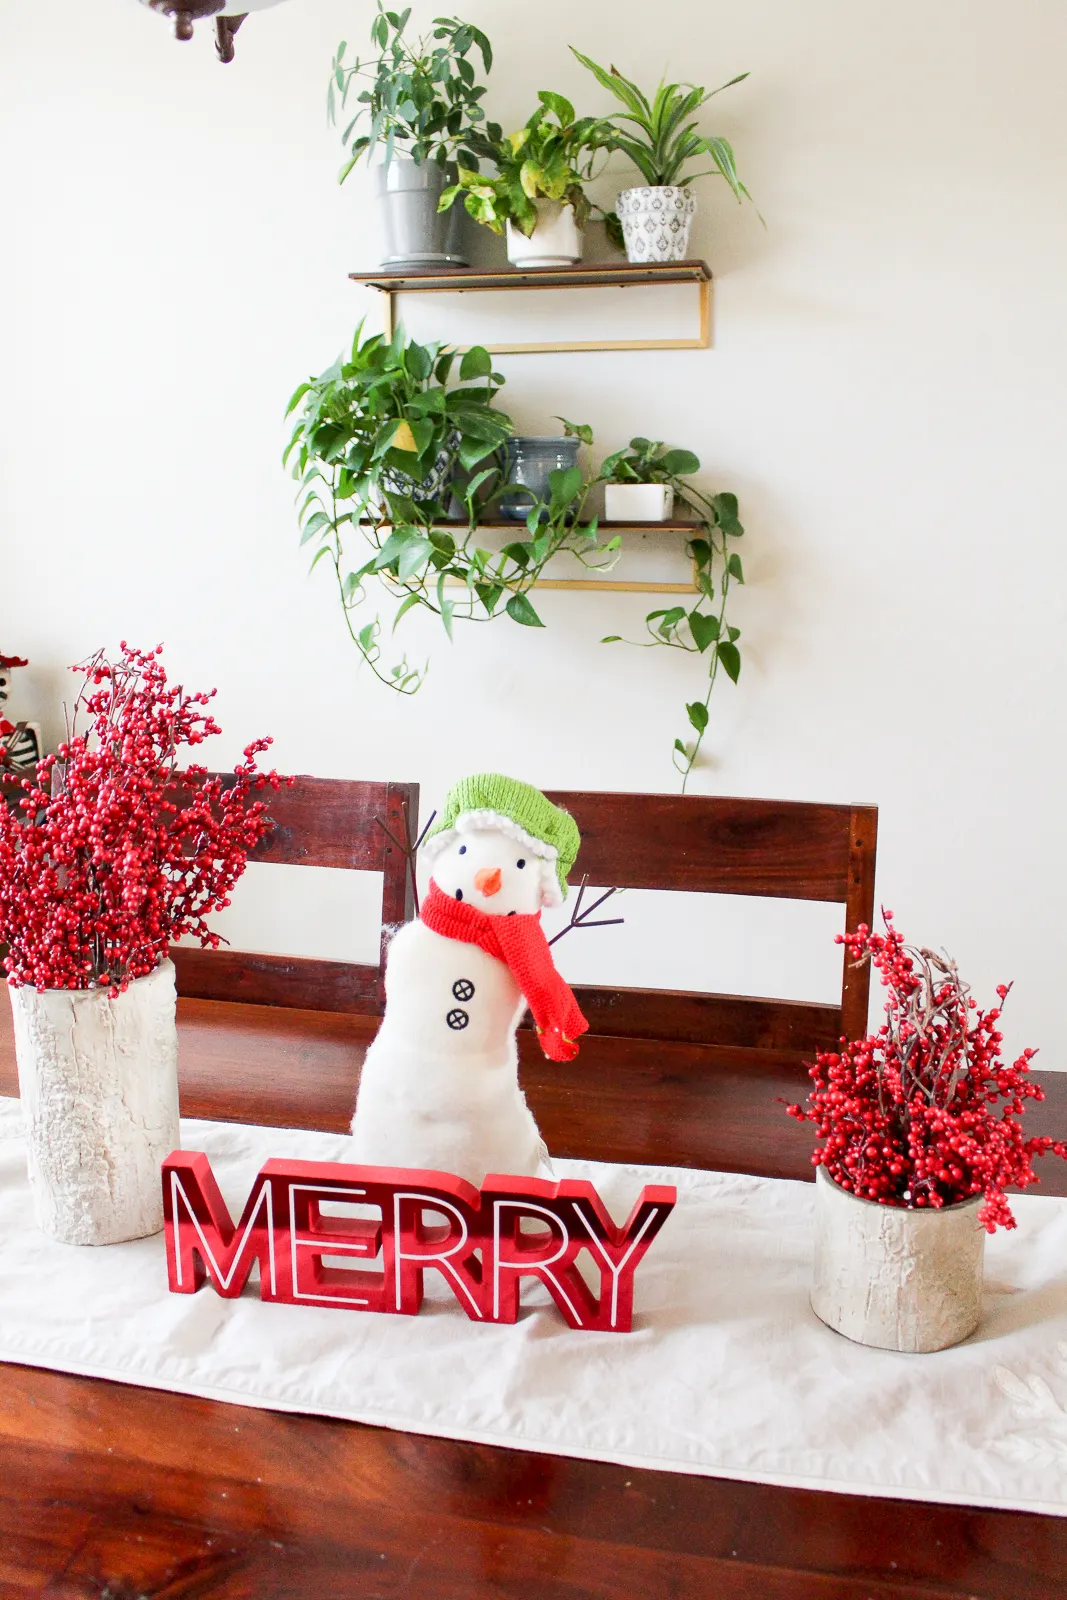 Holiday decoration of snowman on dining room table with two cranberry centerpieces and a sign that says Merry